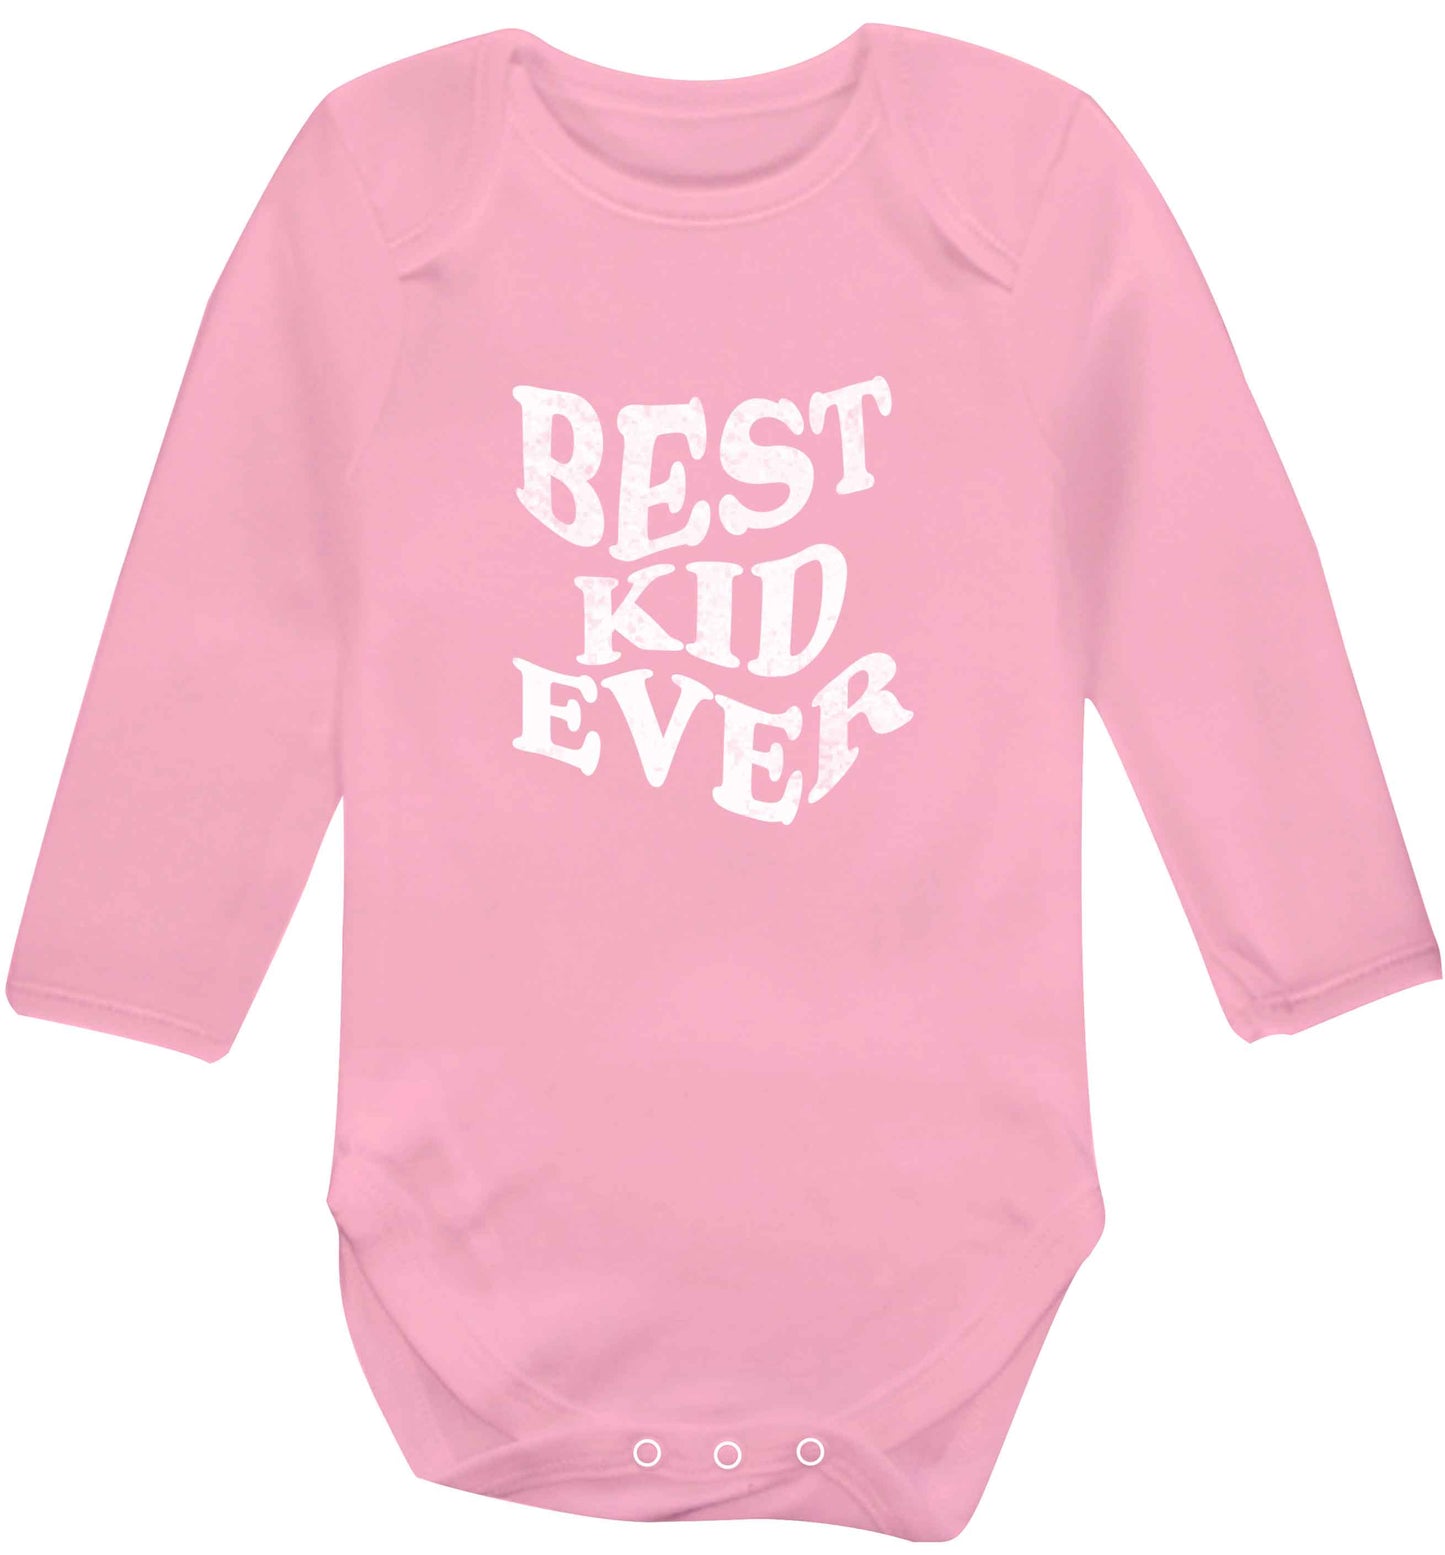 Best kid ever baby vest long sleeved pale pink 6-12 months